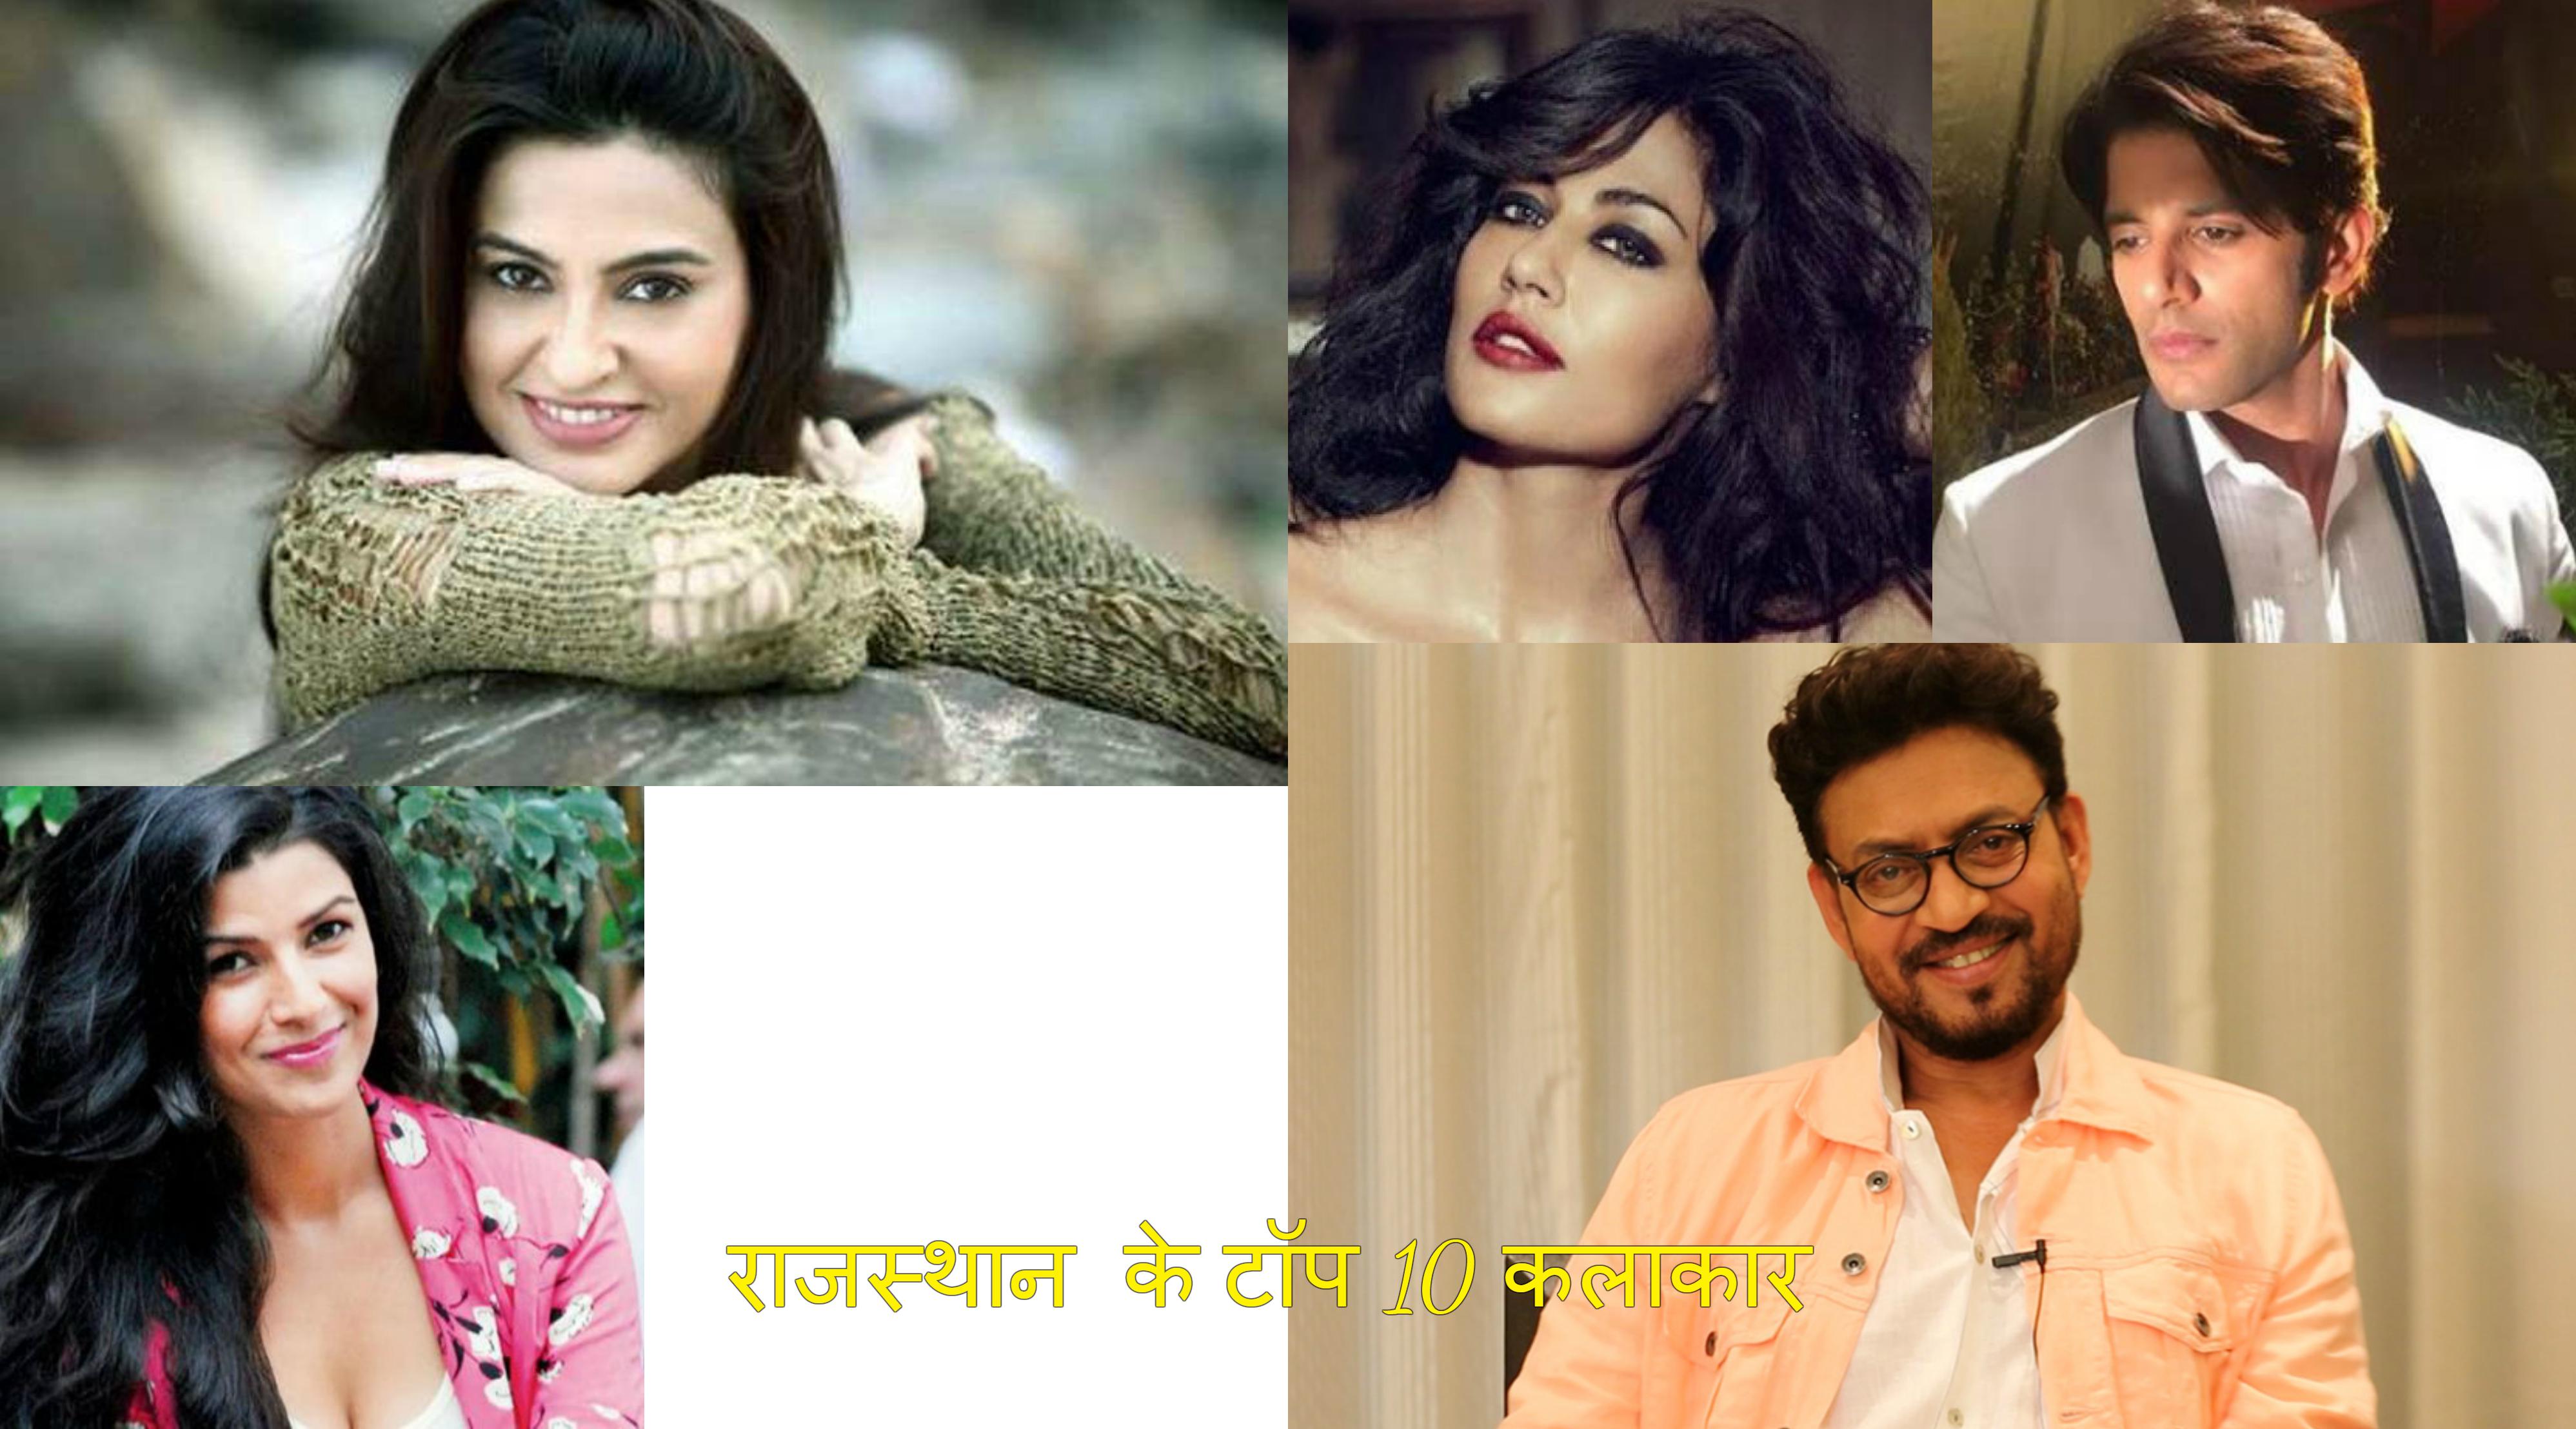 Top 10 TVs and Bollywood celebrities who belong to Rajasthan